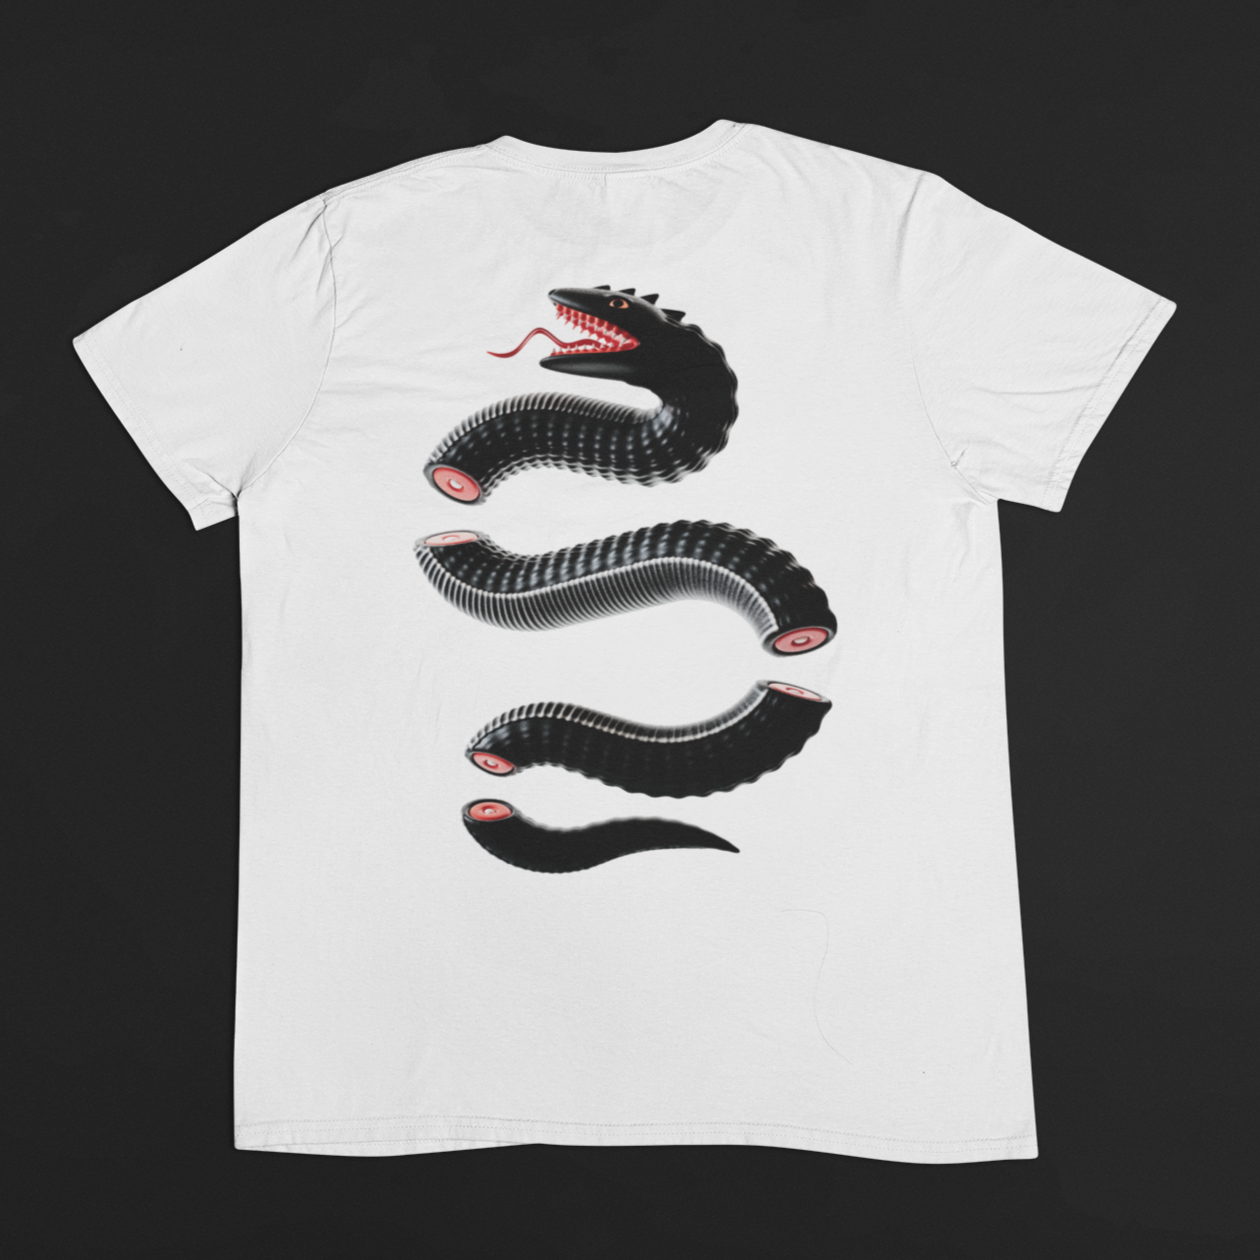 Cut The Head Off The Snake - By Shabloolim - Eco-Friendly Shirt